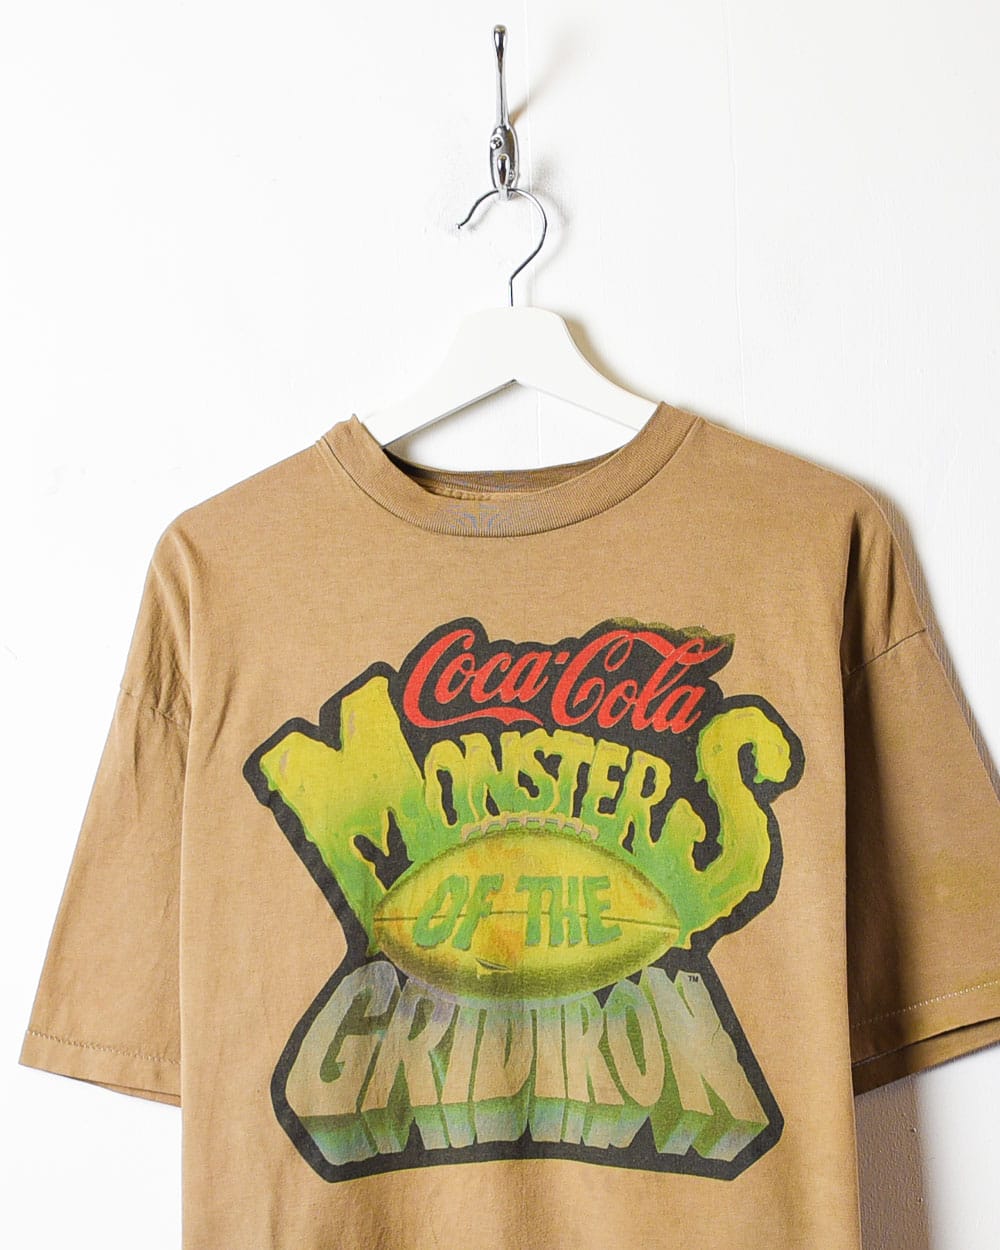 Brown Coca Cola Monsters Of The Gridiron Single Stitch T-Shirt - X-Large